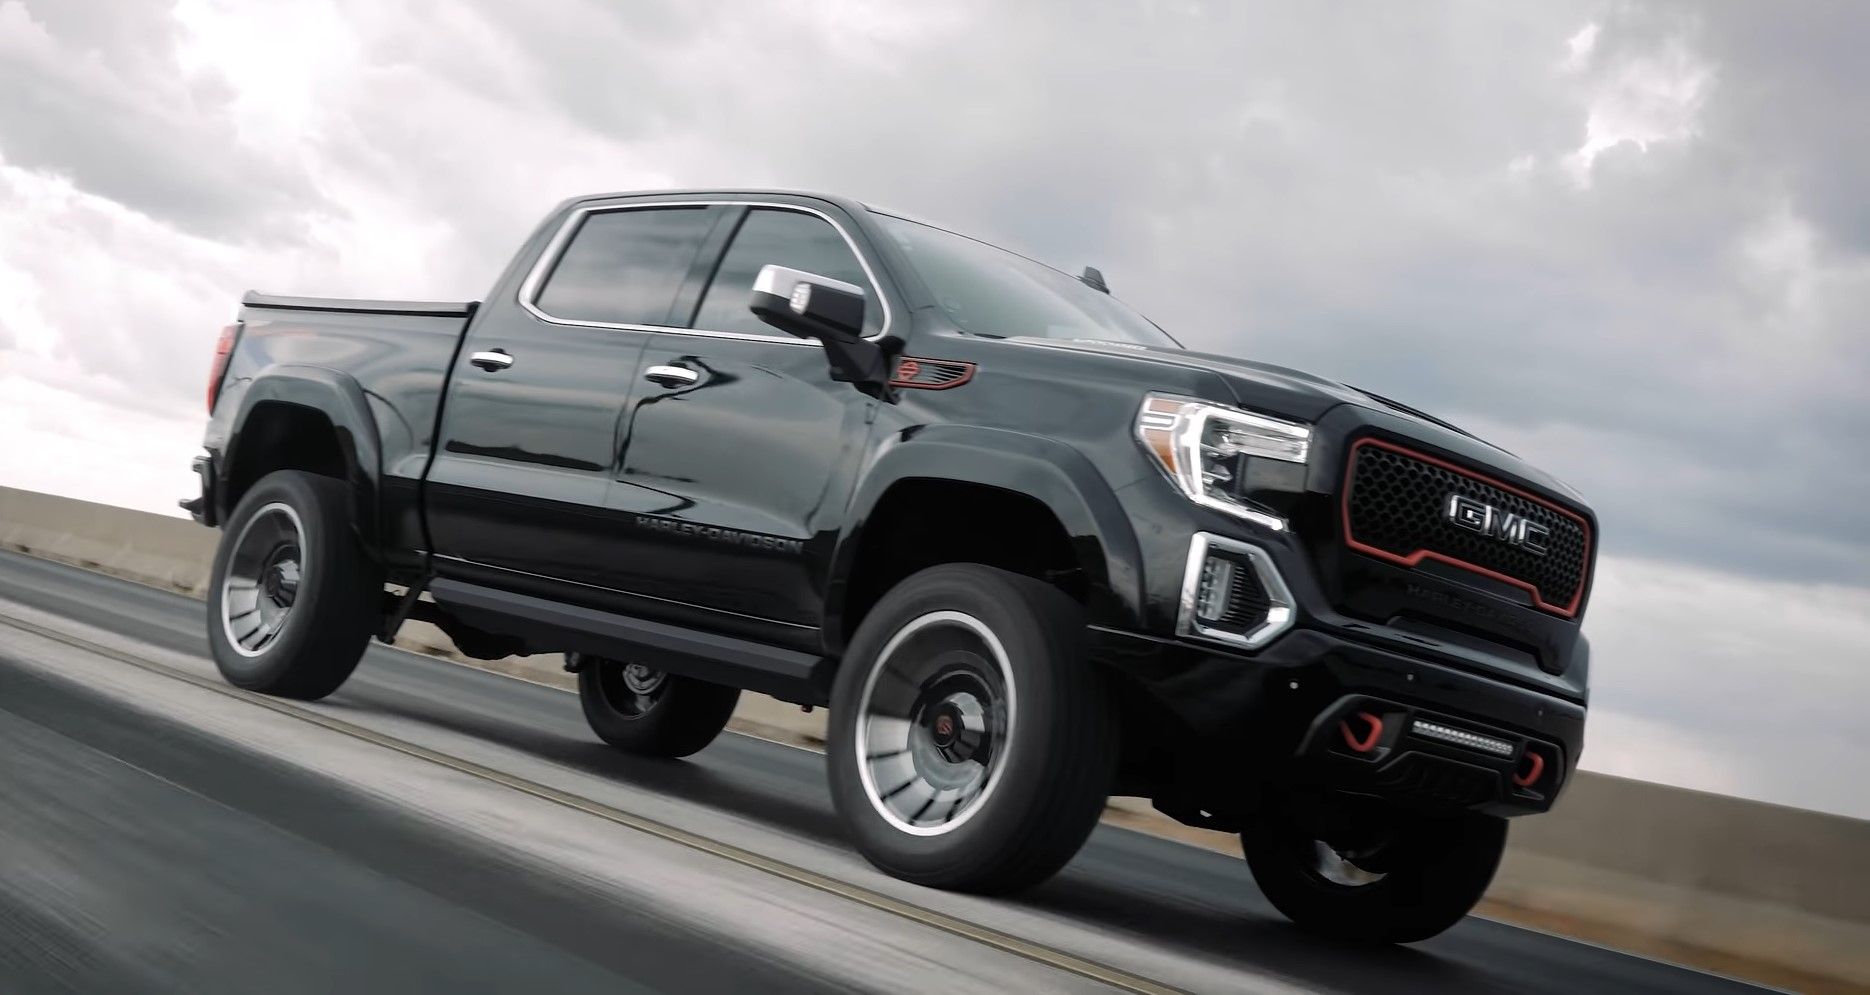 2020 Hennessey Upgrades The 2020 GMC Sierra 1500 Harley-Davidson Edition By Tuscany 